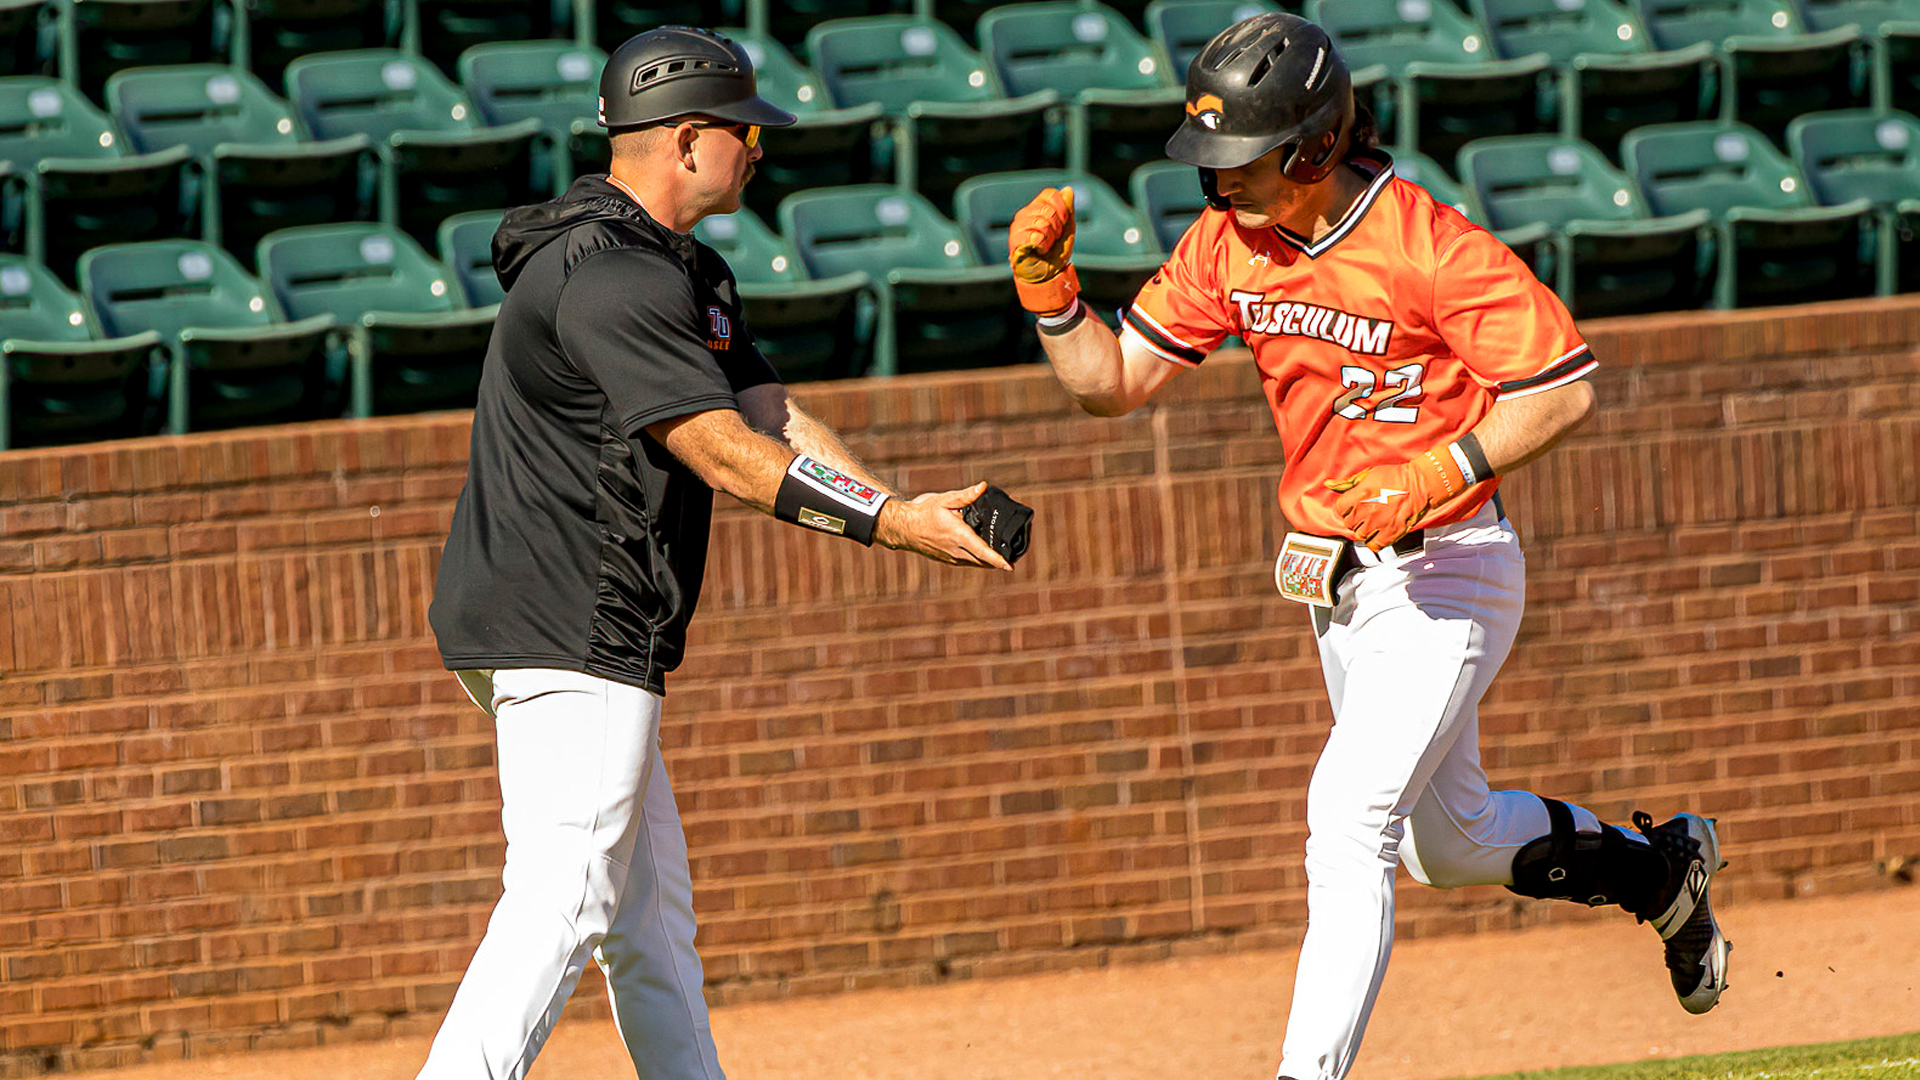 Zane Keener celebrates his grand slam in the 3rd inning as Tusculum defeats Cedarville (Photo by Chuck Williams)